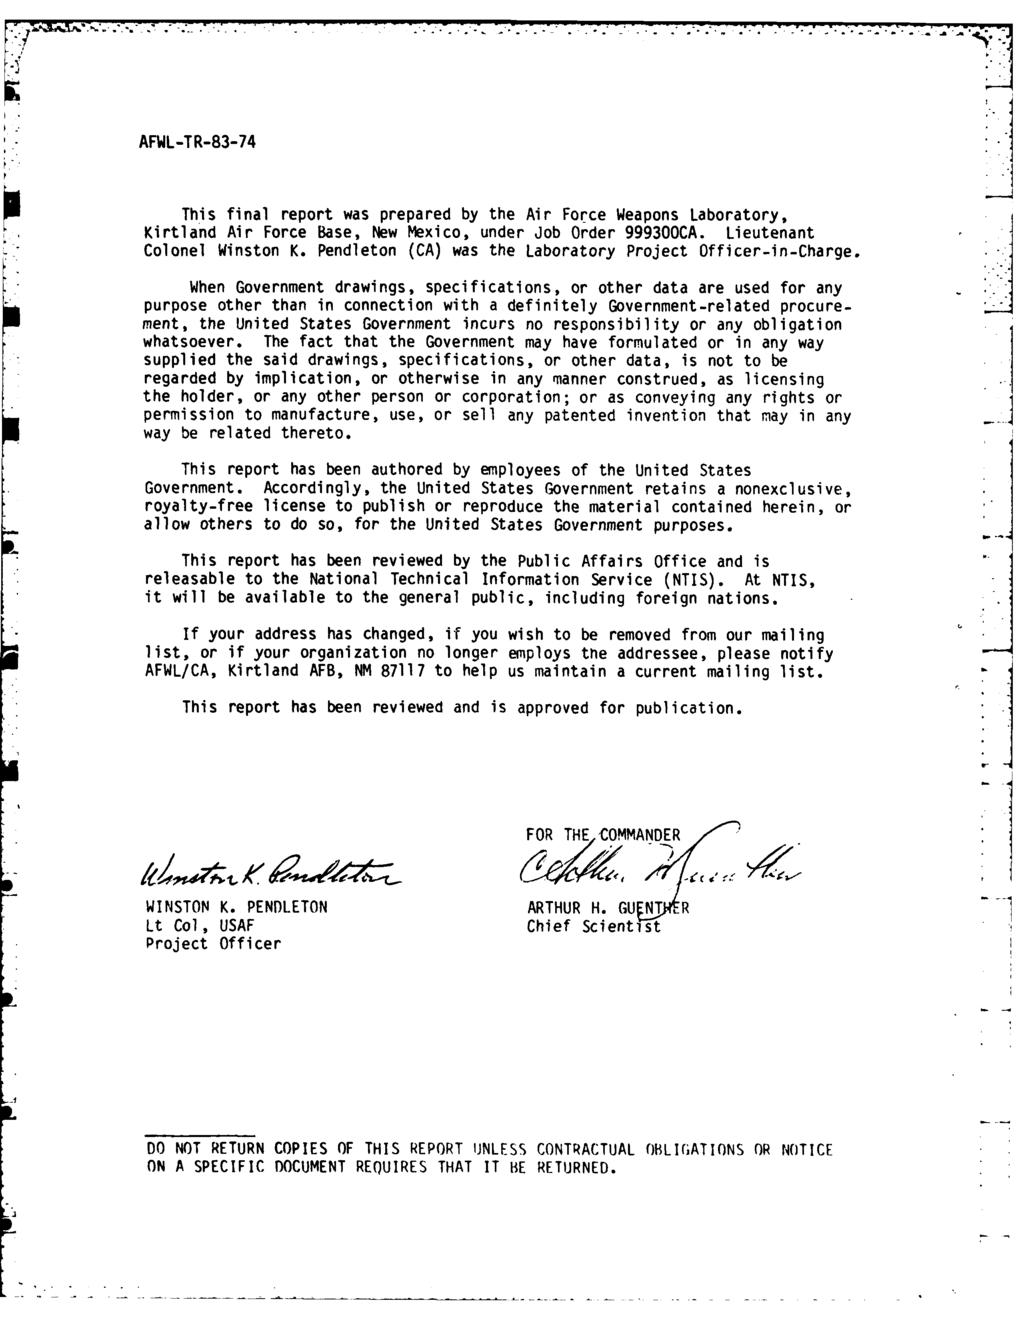 77 * AFWL-TR-83-74 This final report was prepared by the Air Force Weapons Laboratory, Kirtland Air Force Base, New Mexico, under Job Order 999300CA. Lieutenant Colonel Winston K.